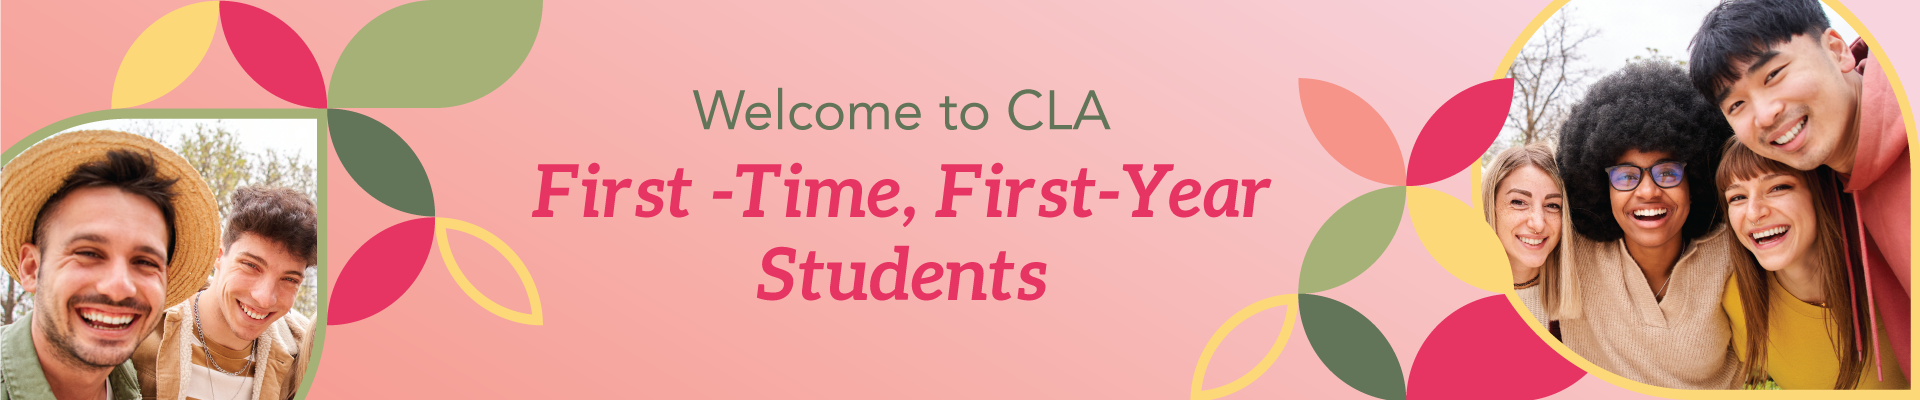 Welcome to CLA First-Time, First-Year Students